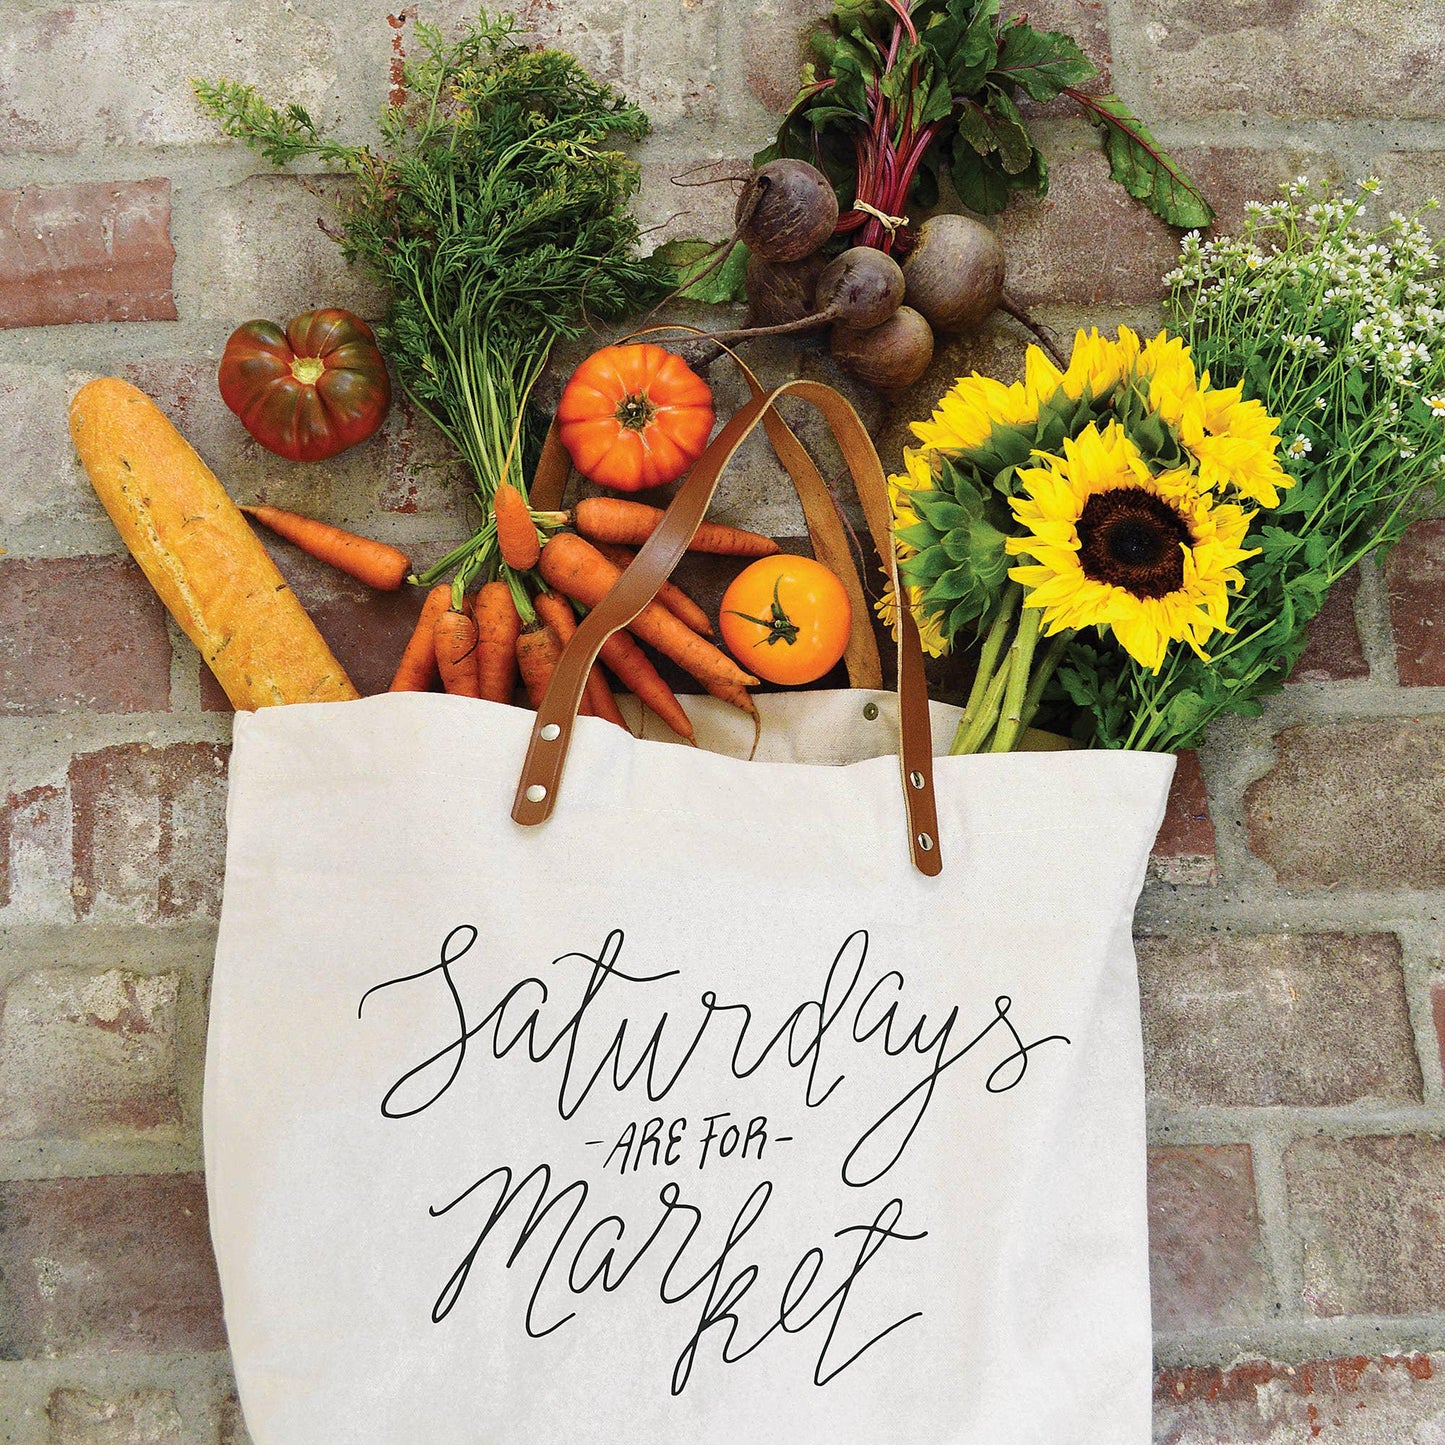 Wild Ink Press - 'Saturdays Are For Market' Tote Bag